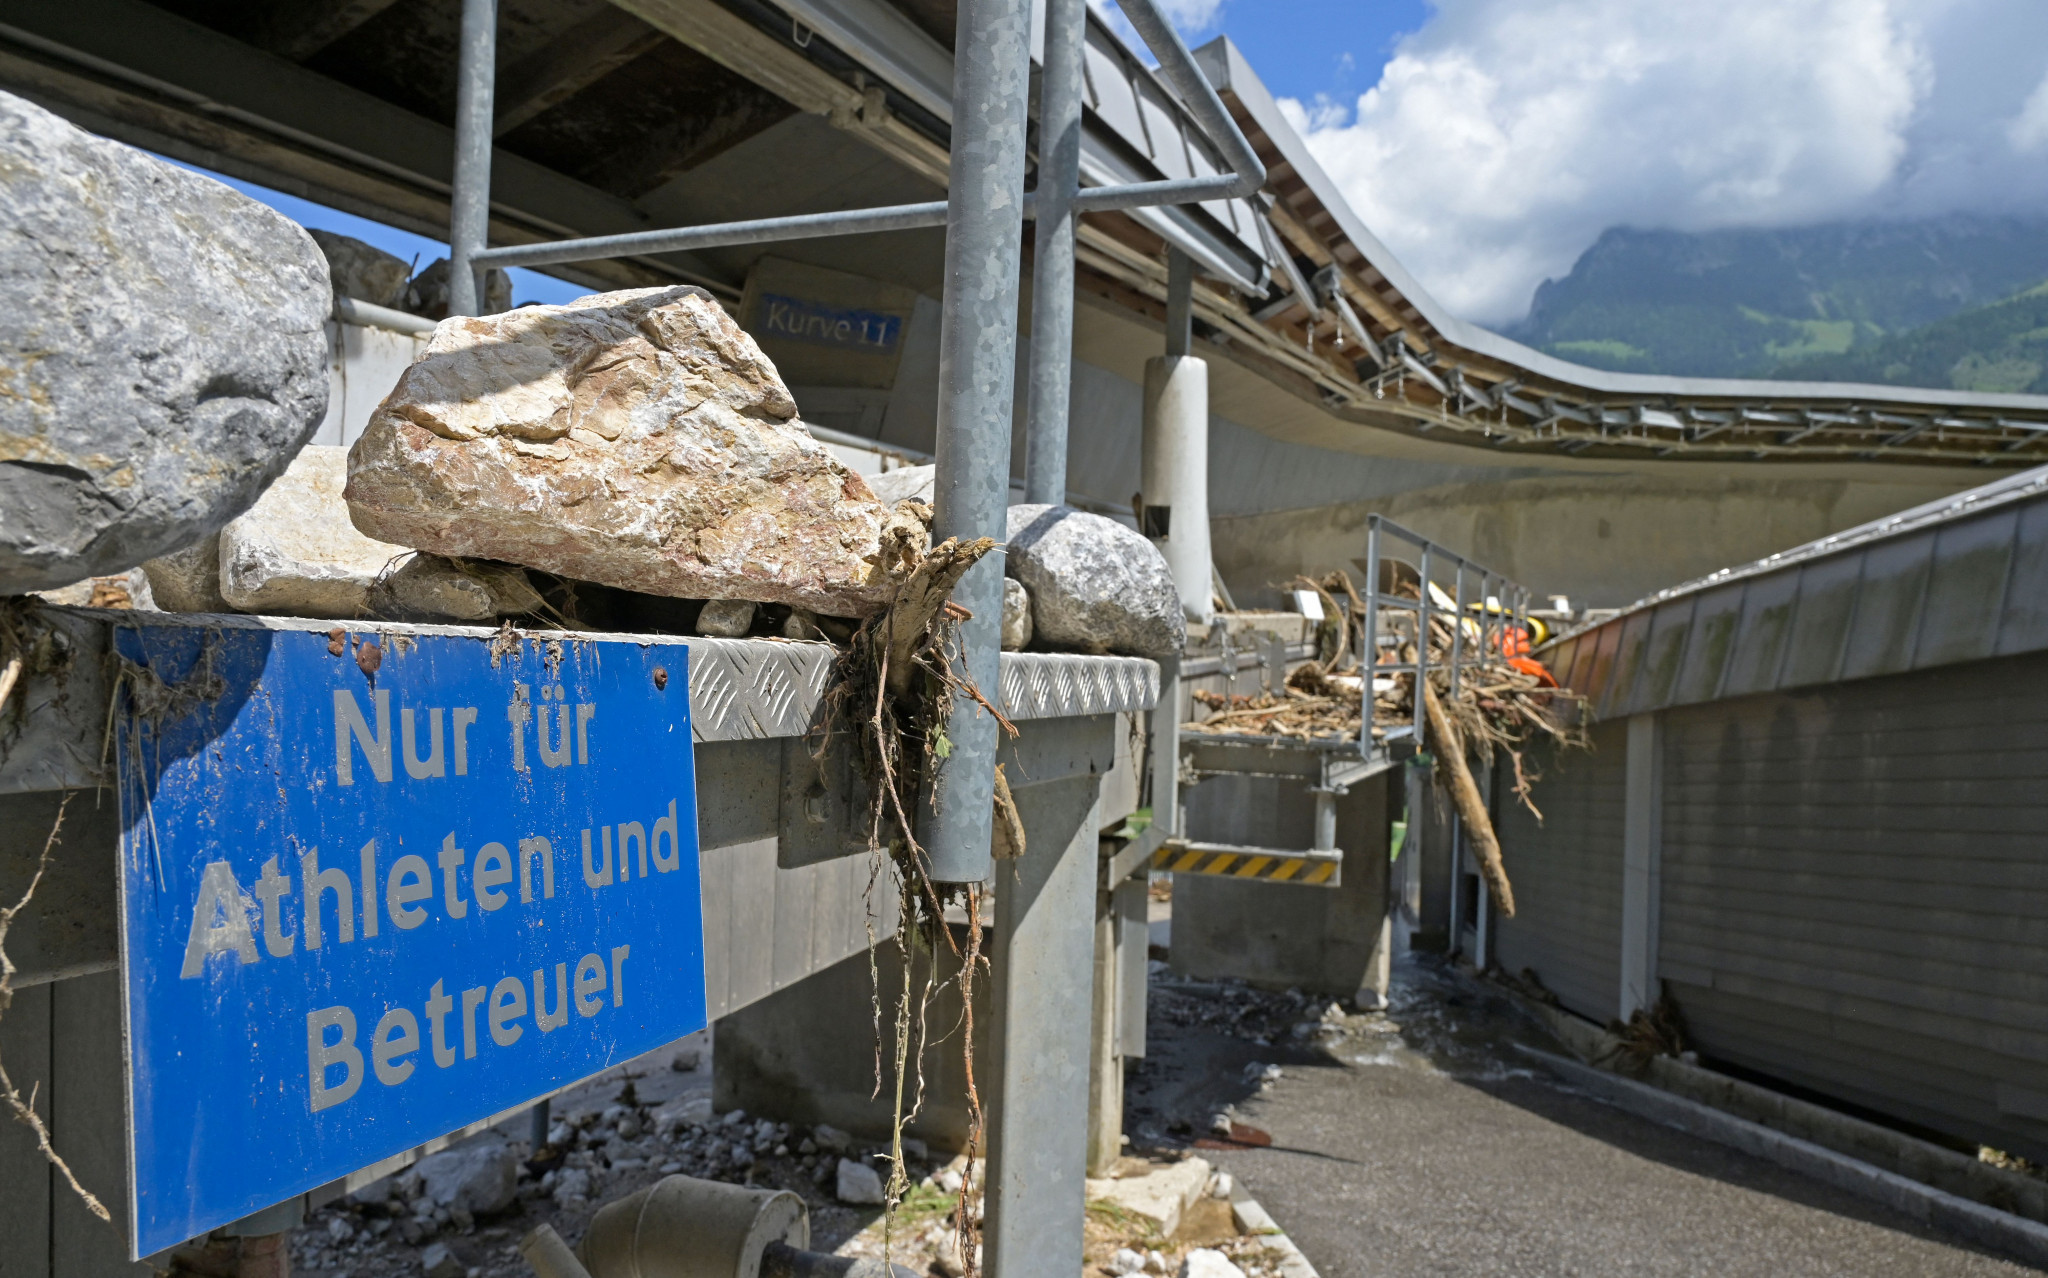 Reconstruction of damaged Königssee sliding track in doubt over disputes